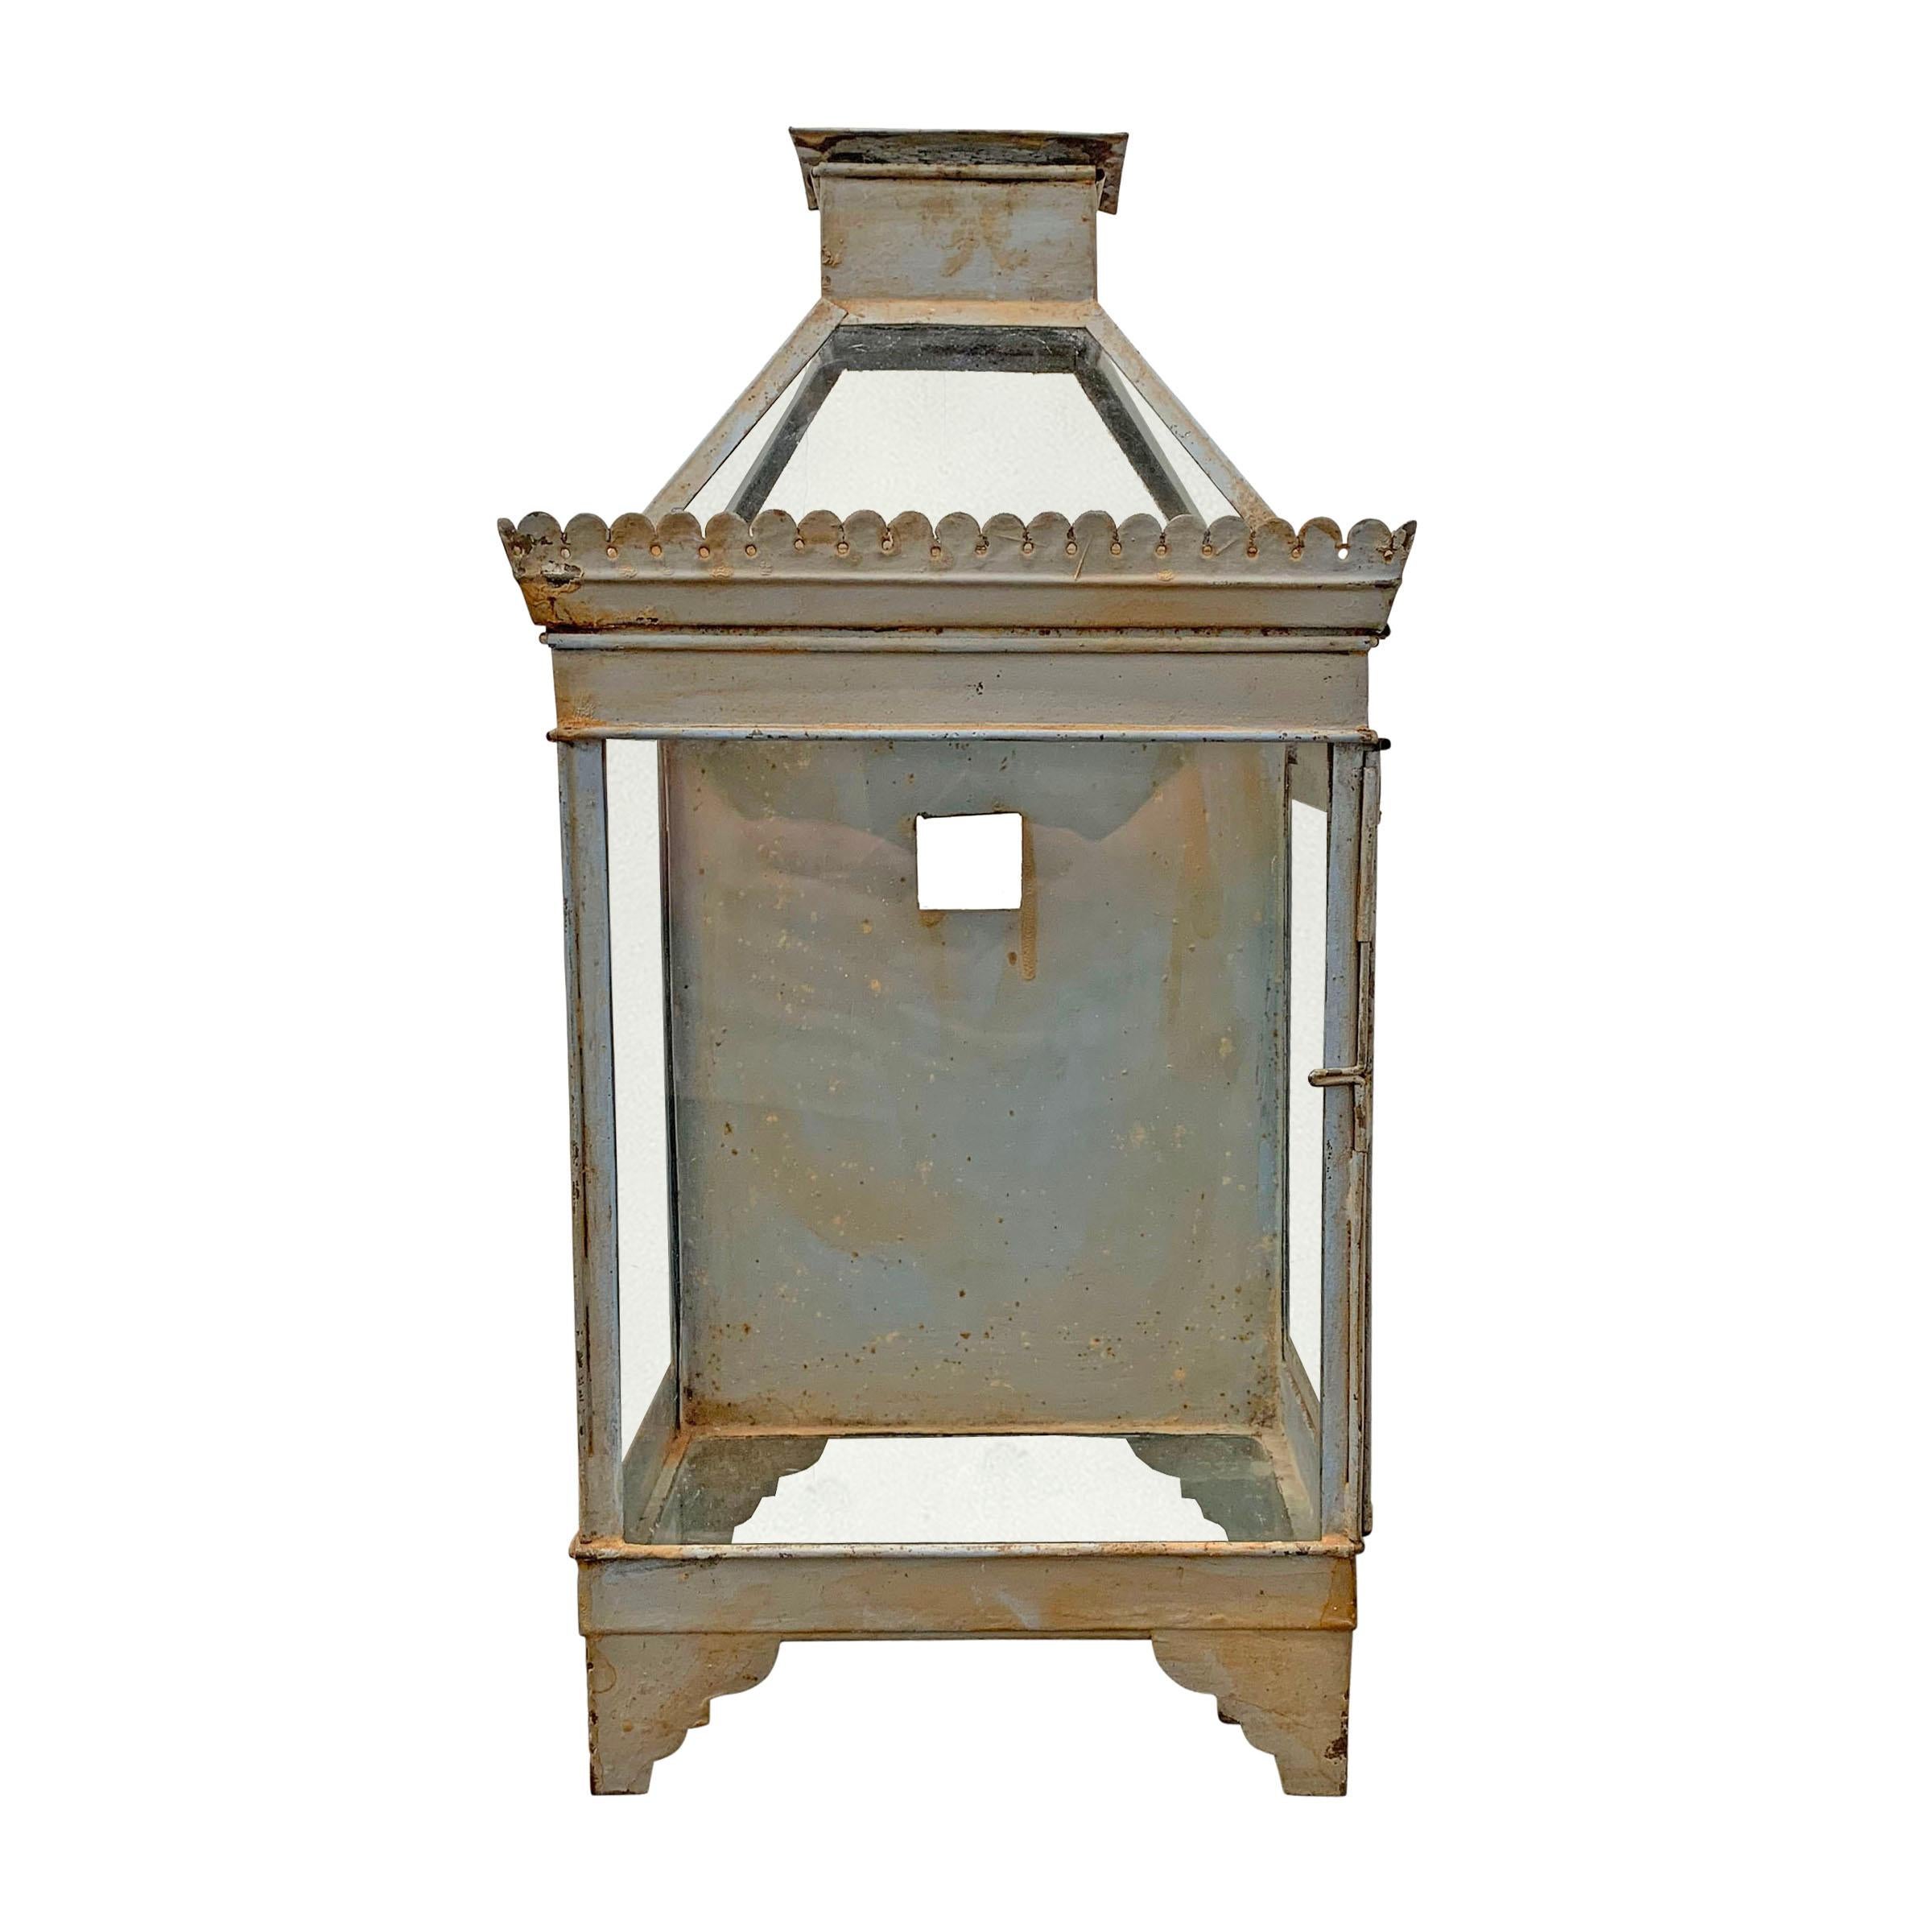 A charming 19th century English blue painted tole wall mount lantern of with a clearstory top that opens, and a door on the side that also opens for access. The square hole in the back was originally used to hang the lantern, but can be used to